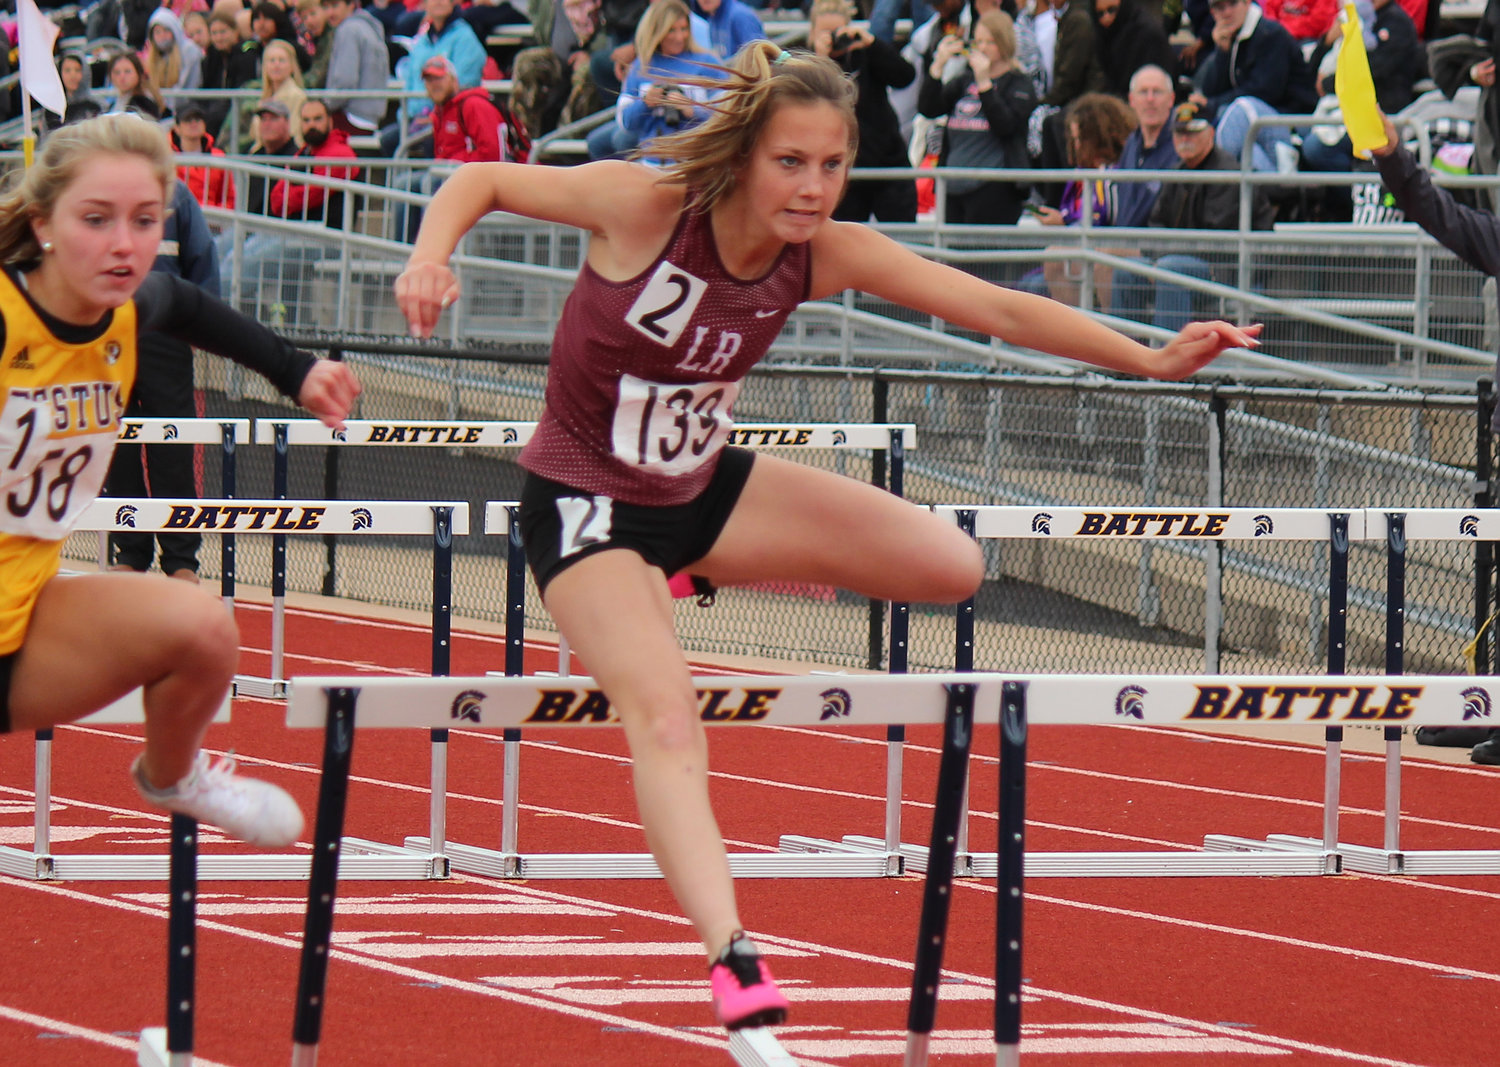 Railey Stillings represented Logan-Rogersville as a freshman in the 100-meter hurdles during the 2020-21 season. Stillings ended the season with a personal best in both the 100M (12.61) and 100M hurdles (16.19).